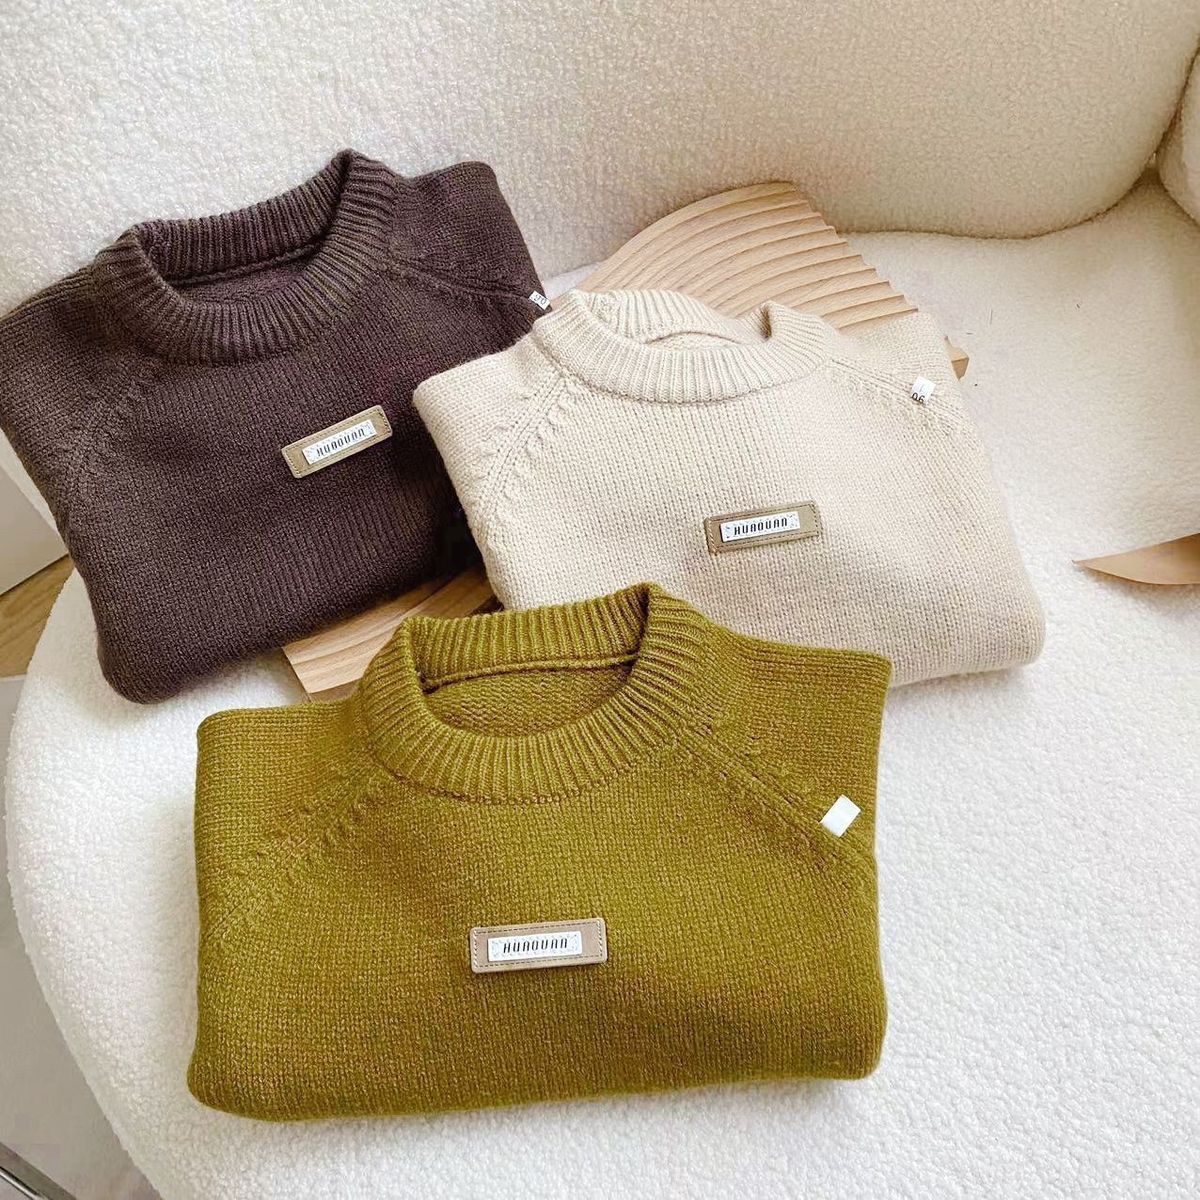 Brand~ Boys' sweater autumn and winter 2022 latest style children's solid color round neck sweater baby soft waxy top